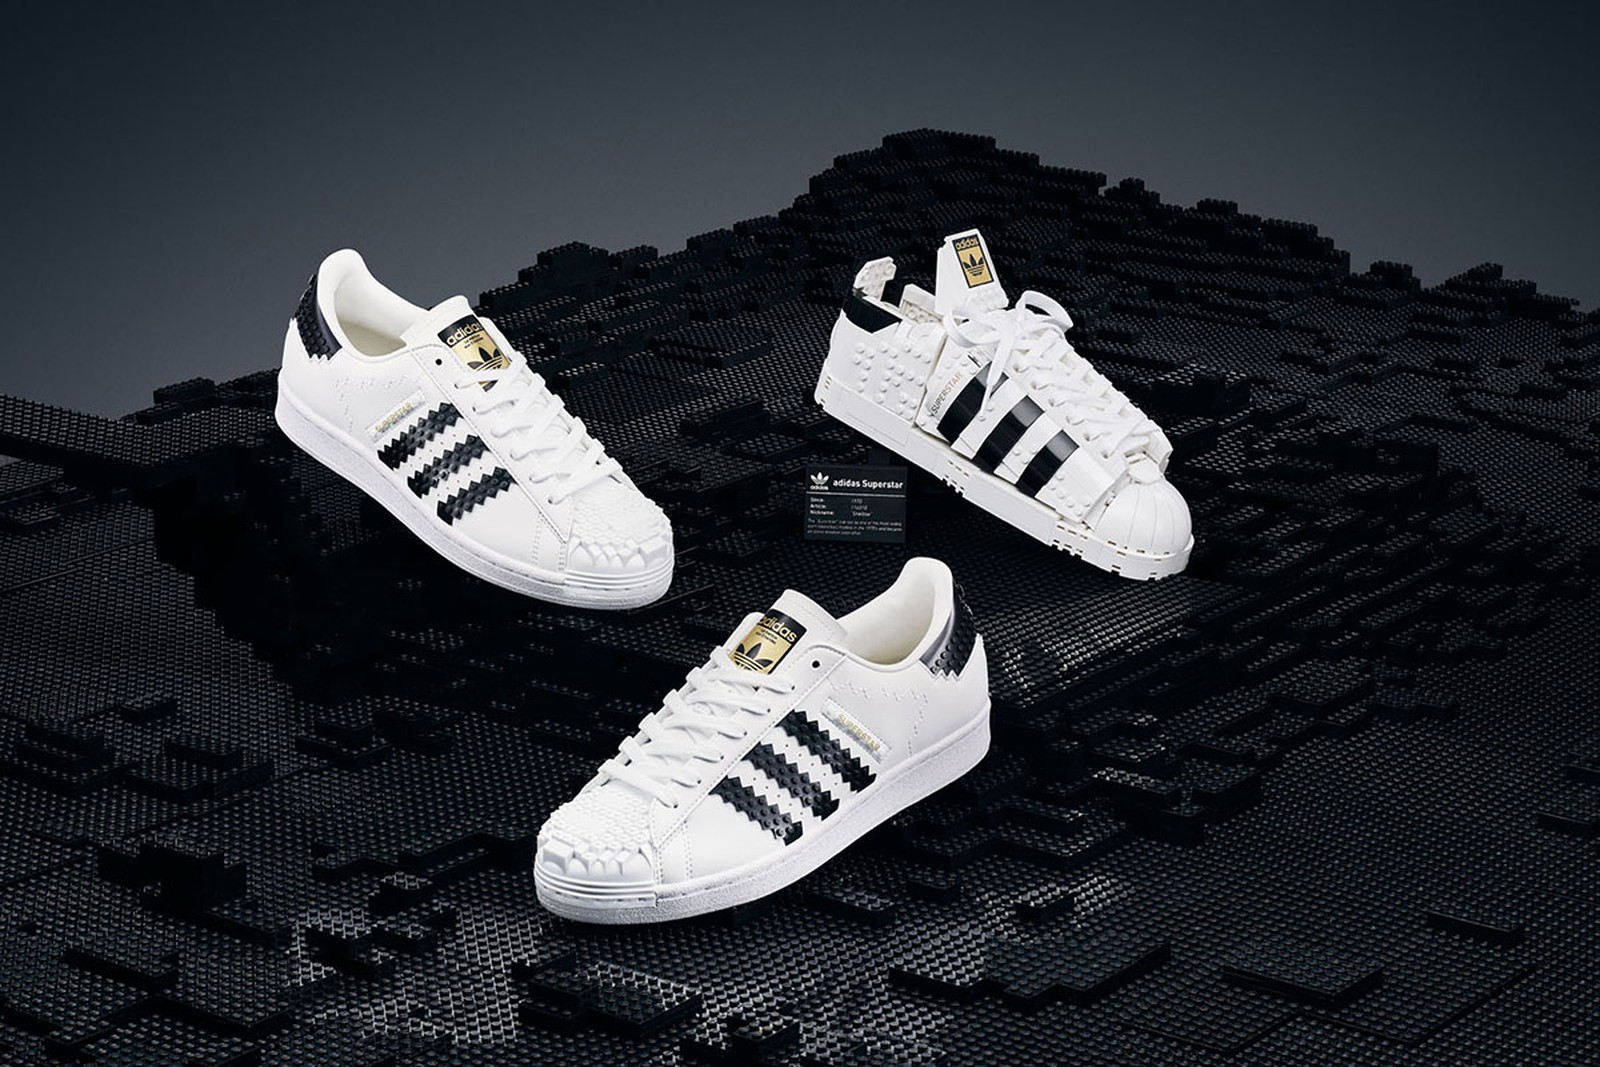 LEGO And Adidas Celebrate Superstar’s Legacy In Latest Collaboration